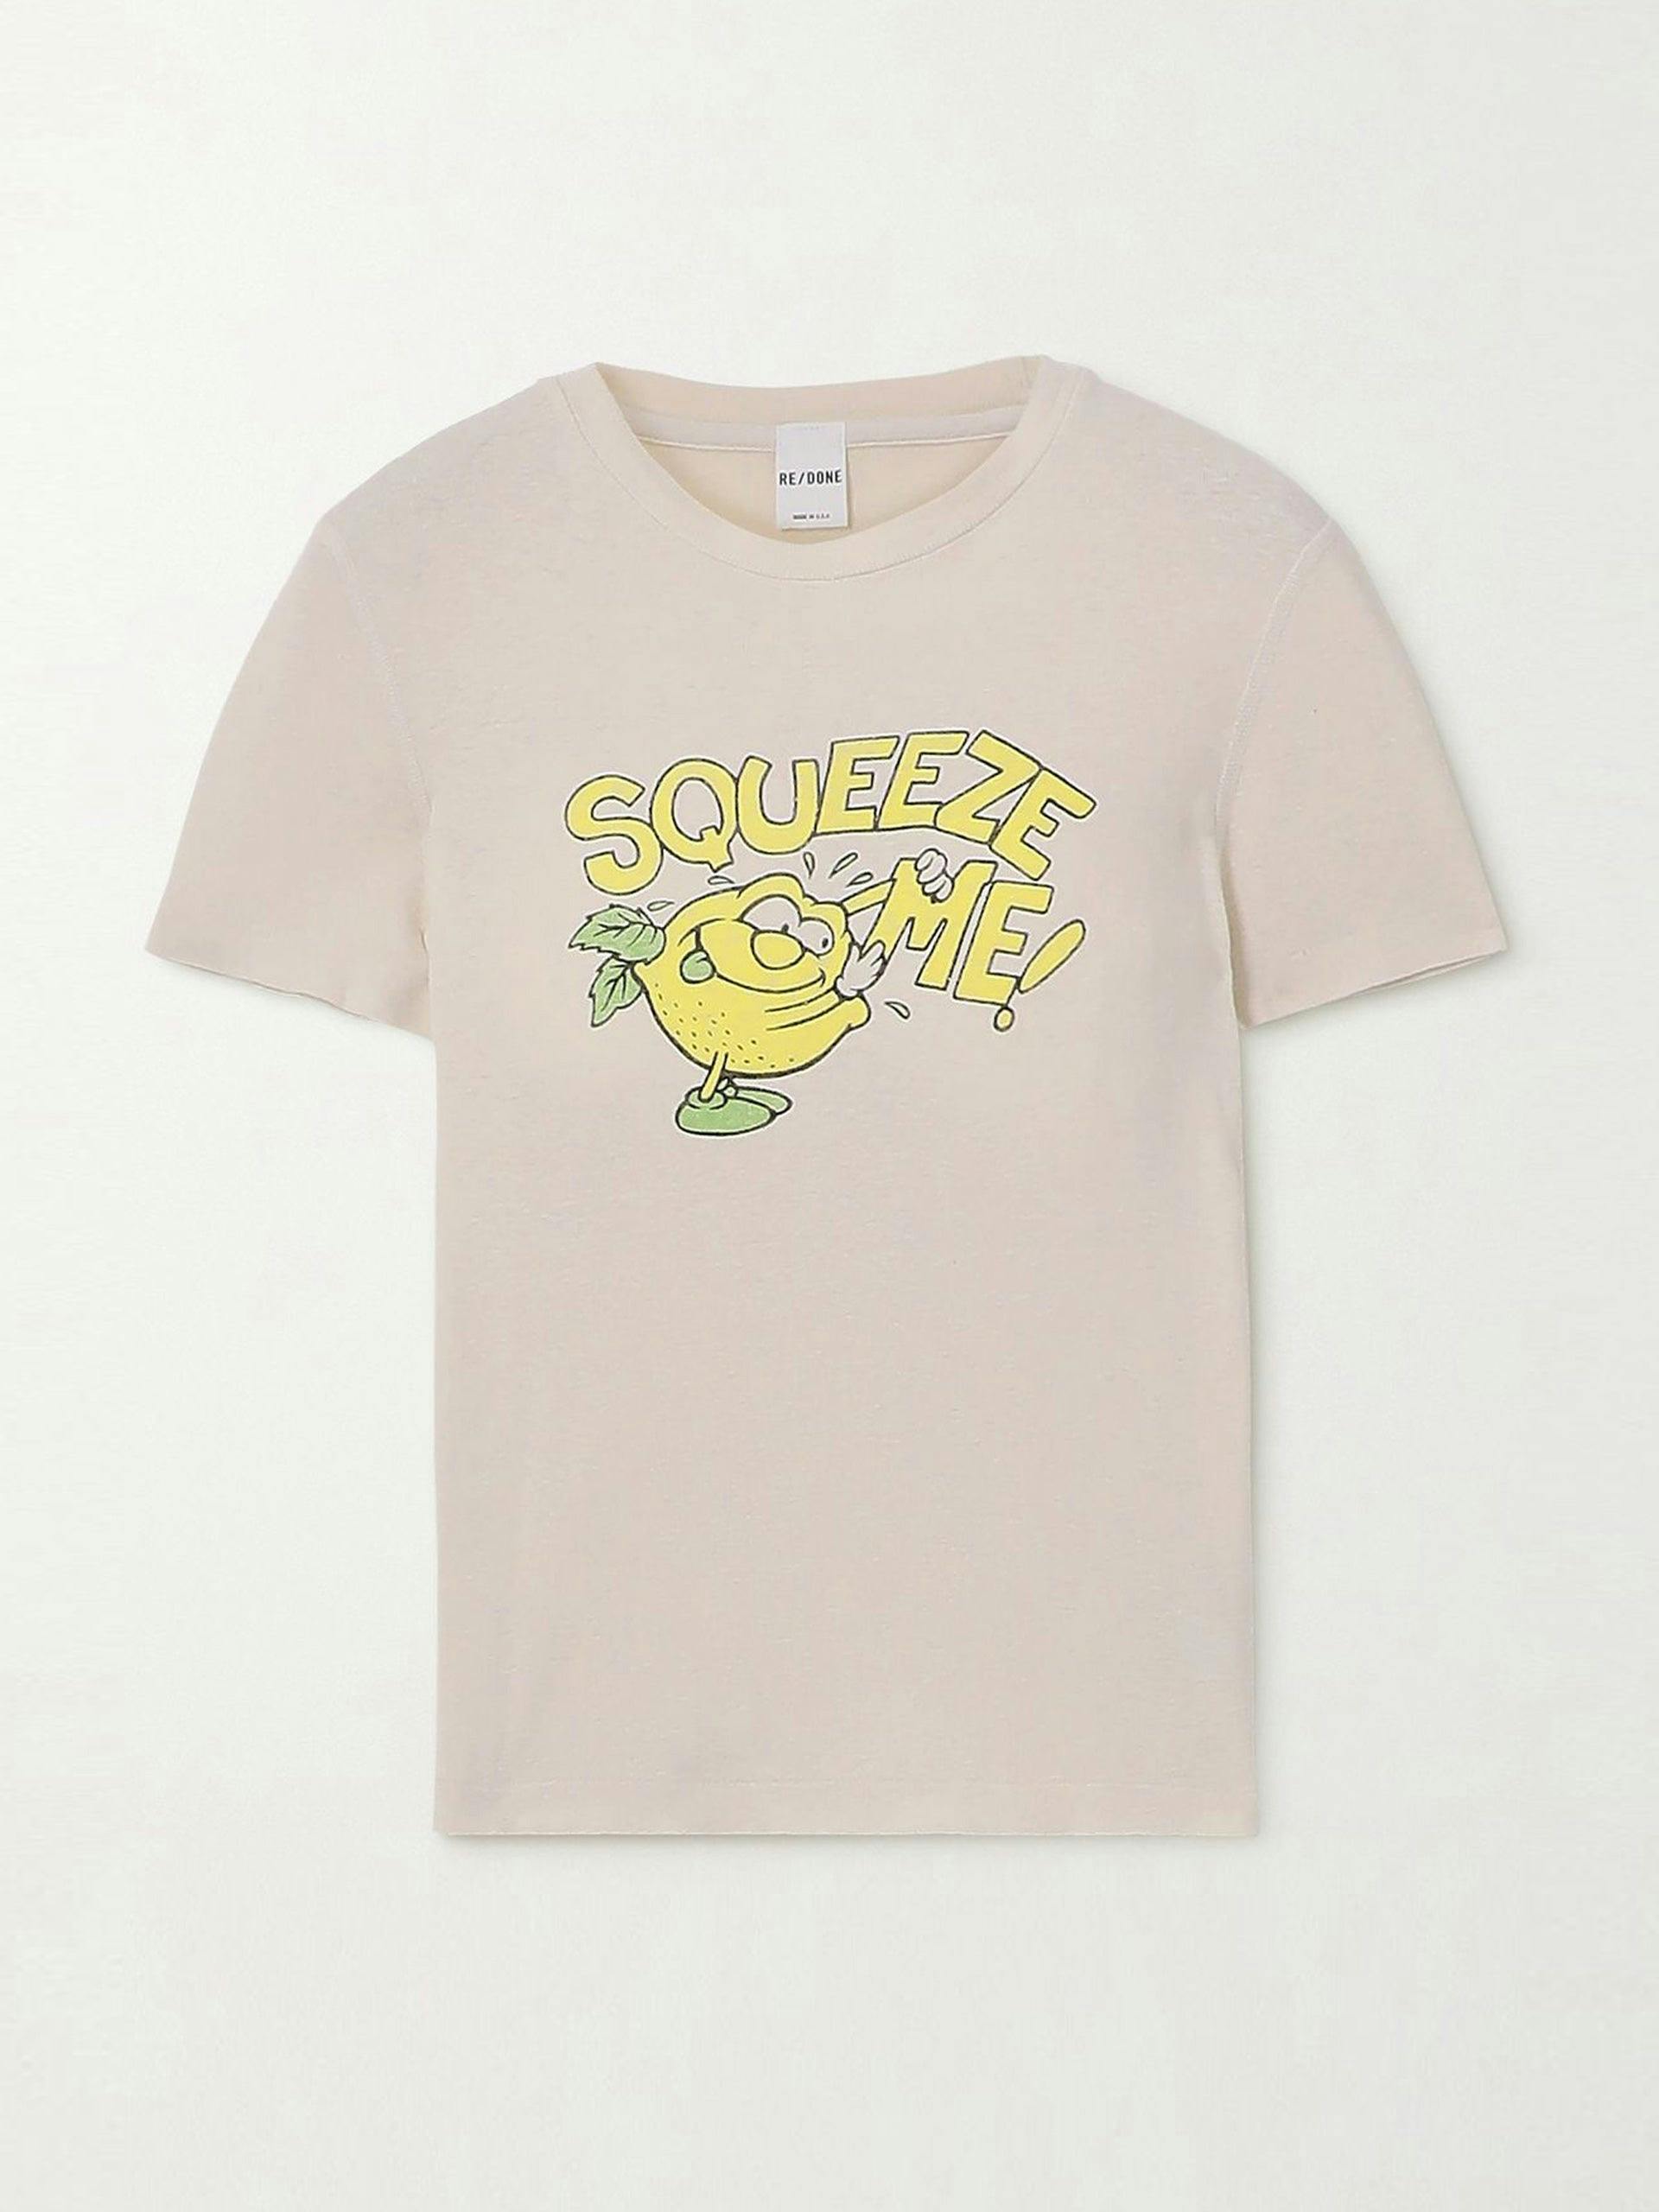 cotton jersey squeeze me tshirt